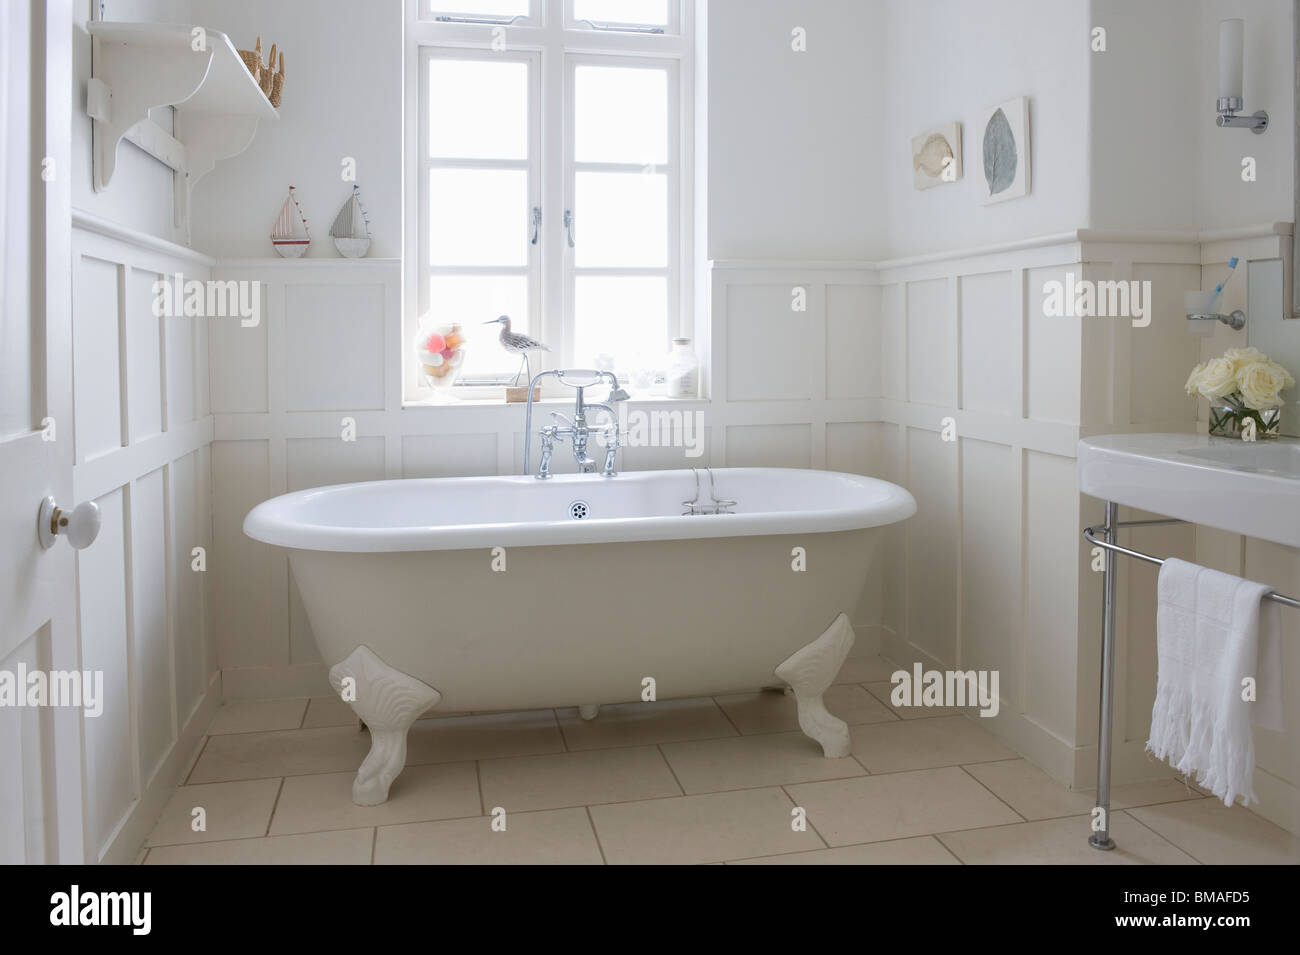 Freestanding roll top in panelled bathroom, London Stock Photo